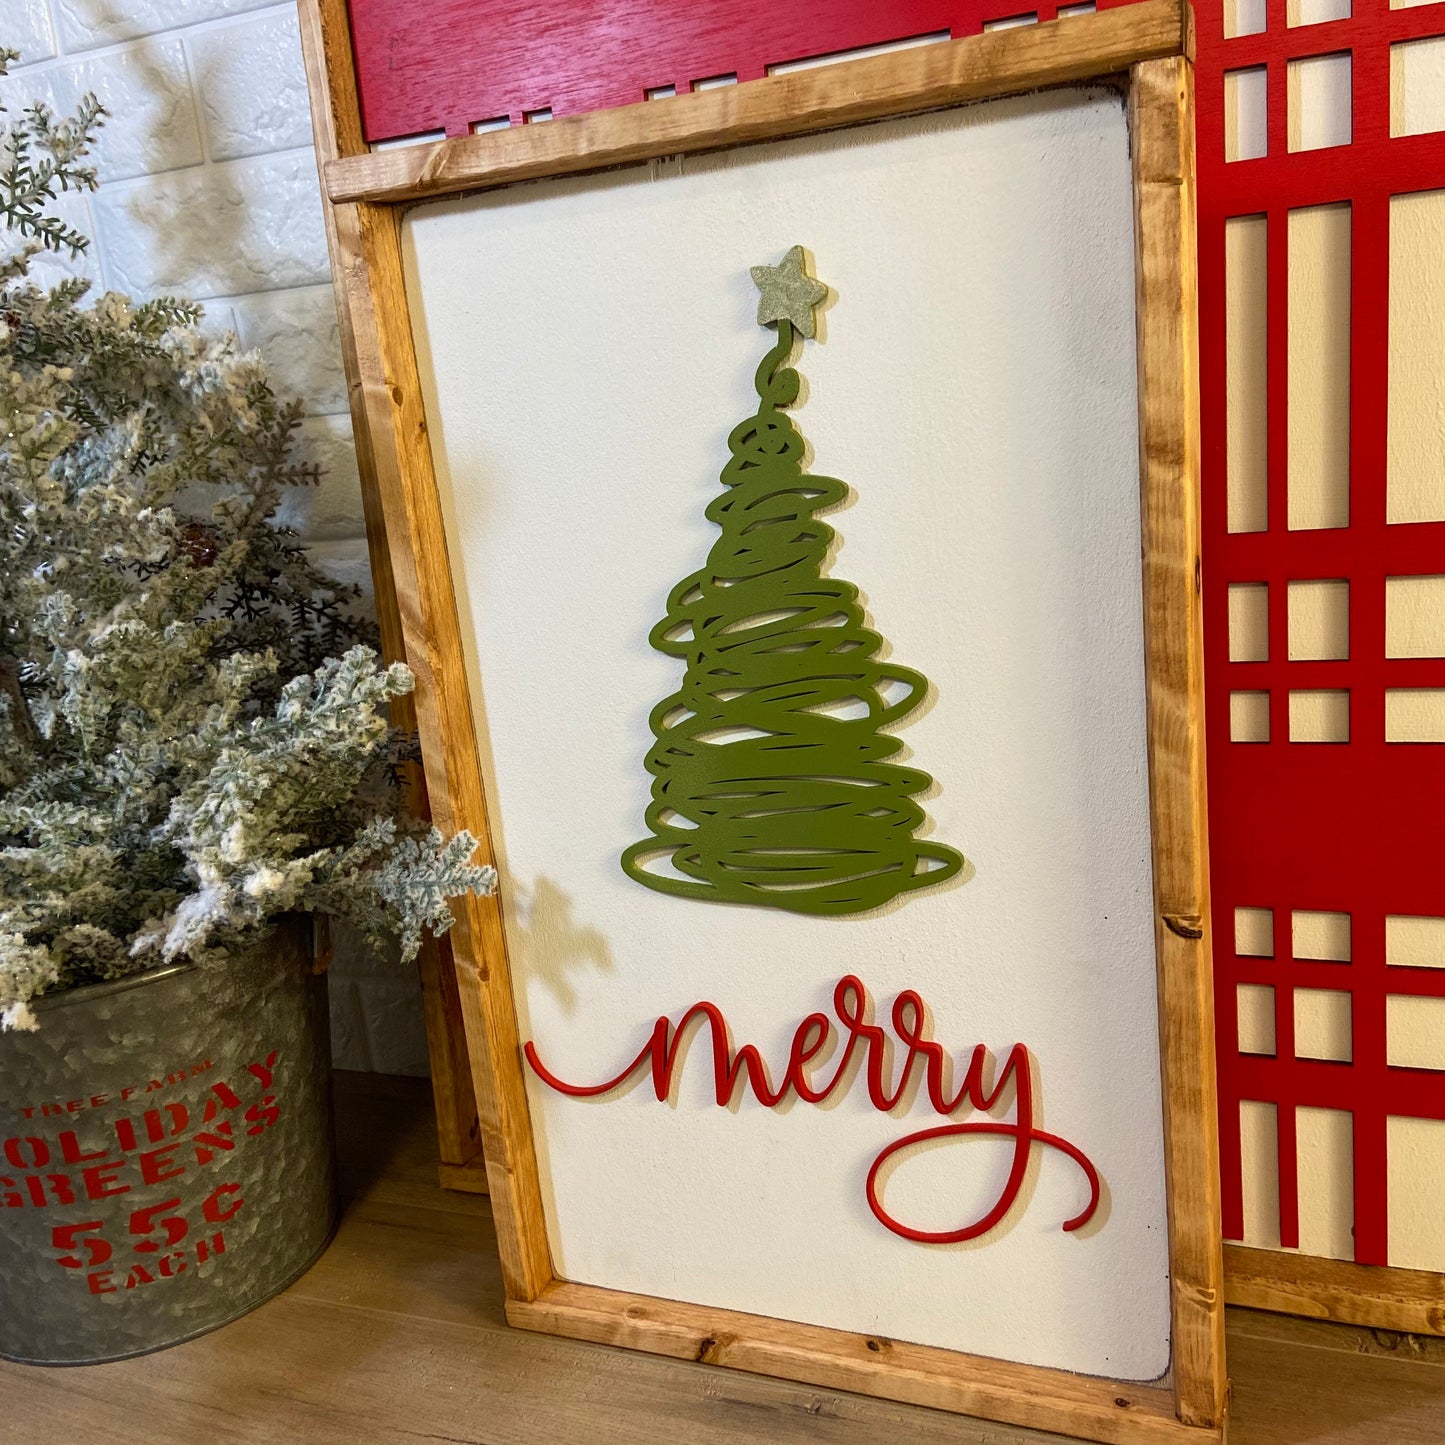 merry, whimsical tree - Christmas wood sign, mantle decor [FREE SHIPPING!]